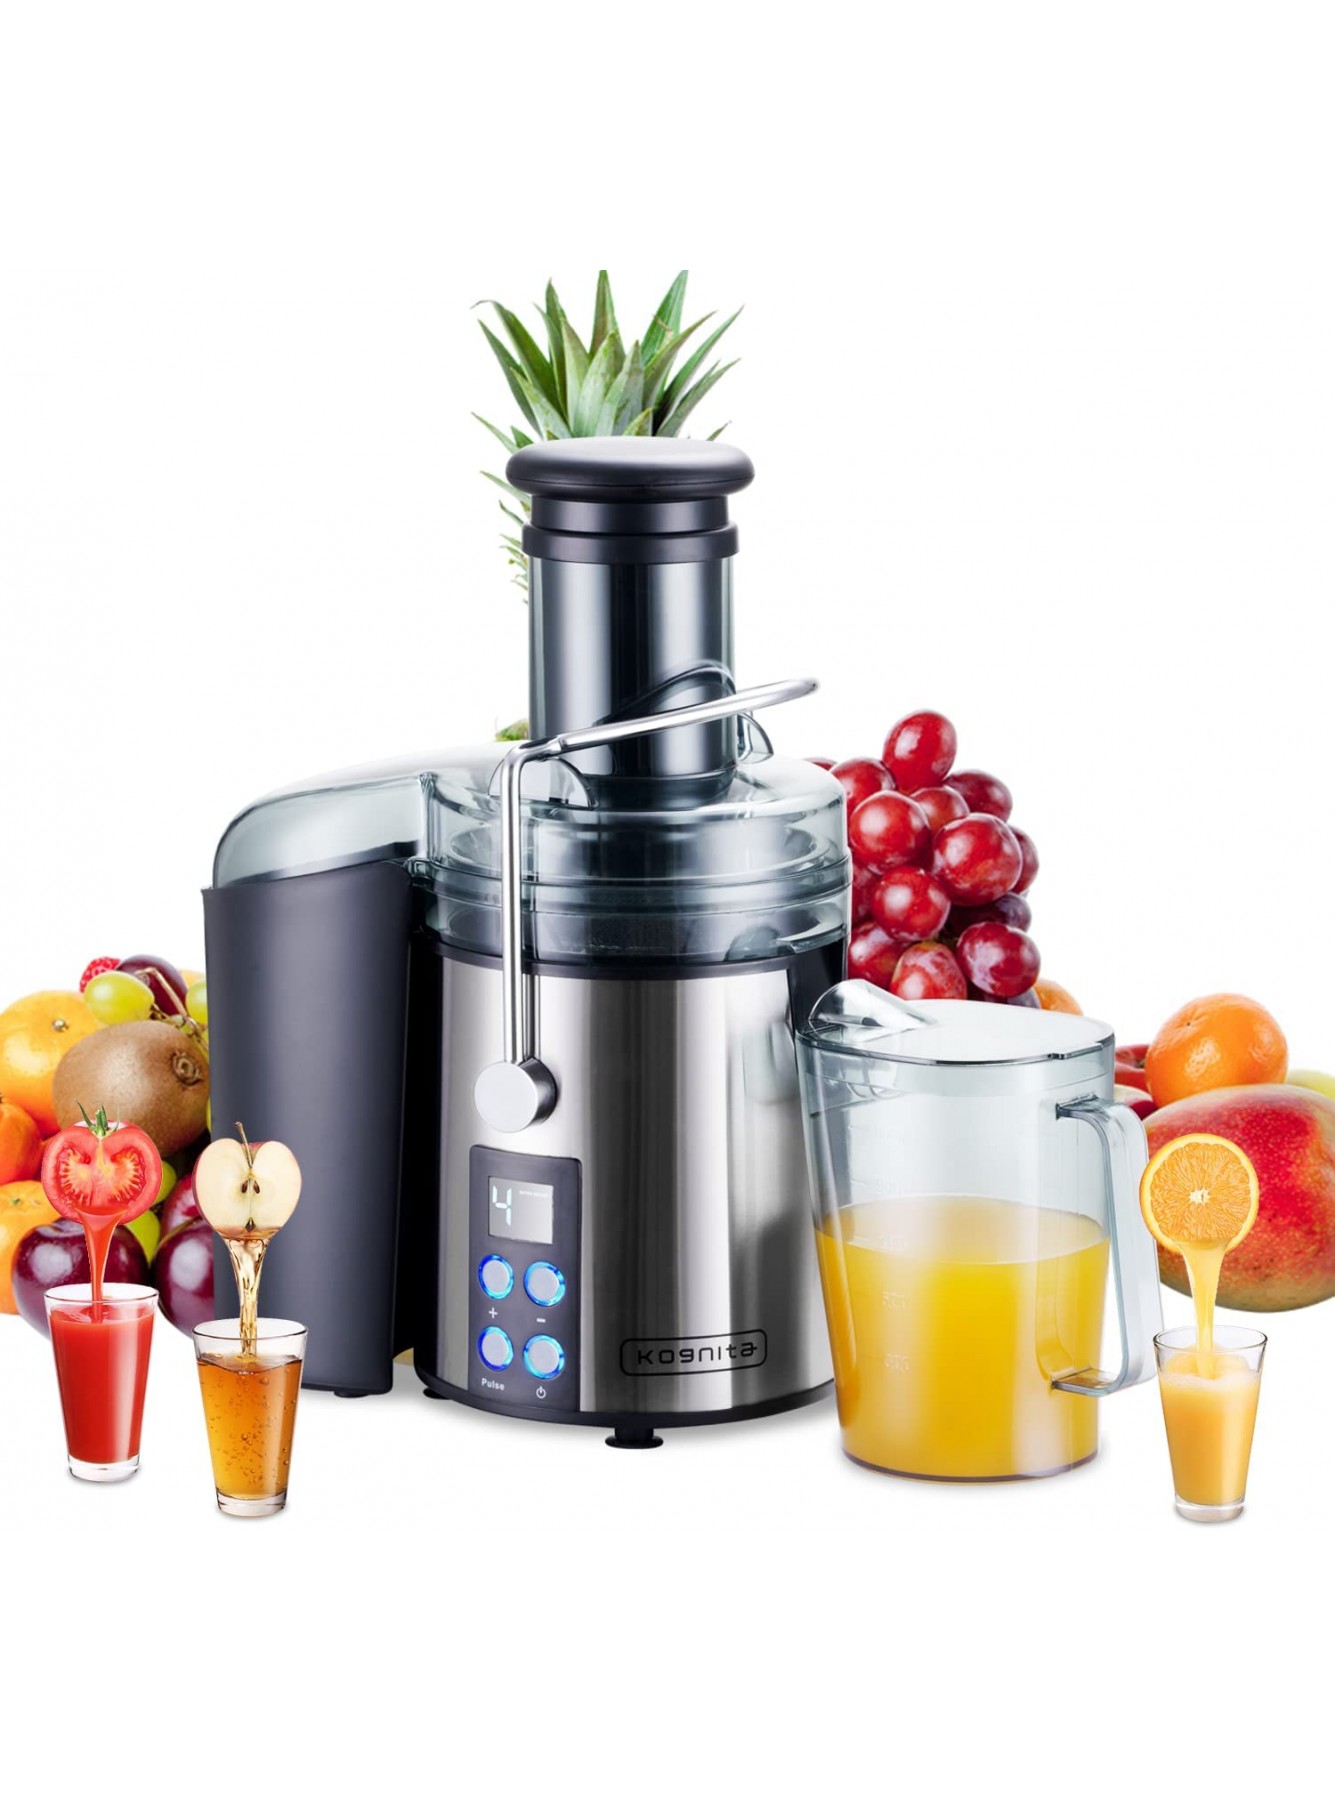 Juicer Machines Kognita LCD Monitor 1100W Centrifugal Juicer with 3'' Big Mouth Feed Chute Anti-drip Tainless-steel Filter Easy Clean Included Brush B09FPL1GD4